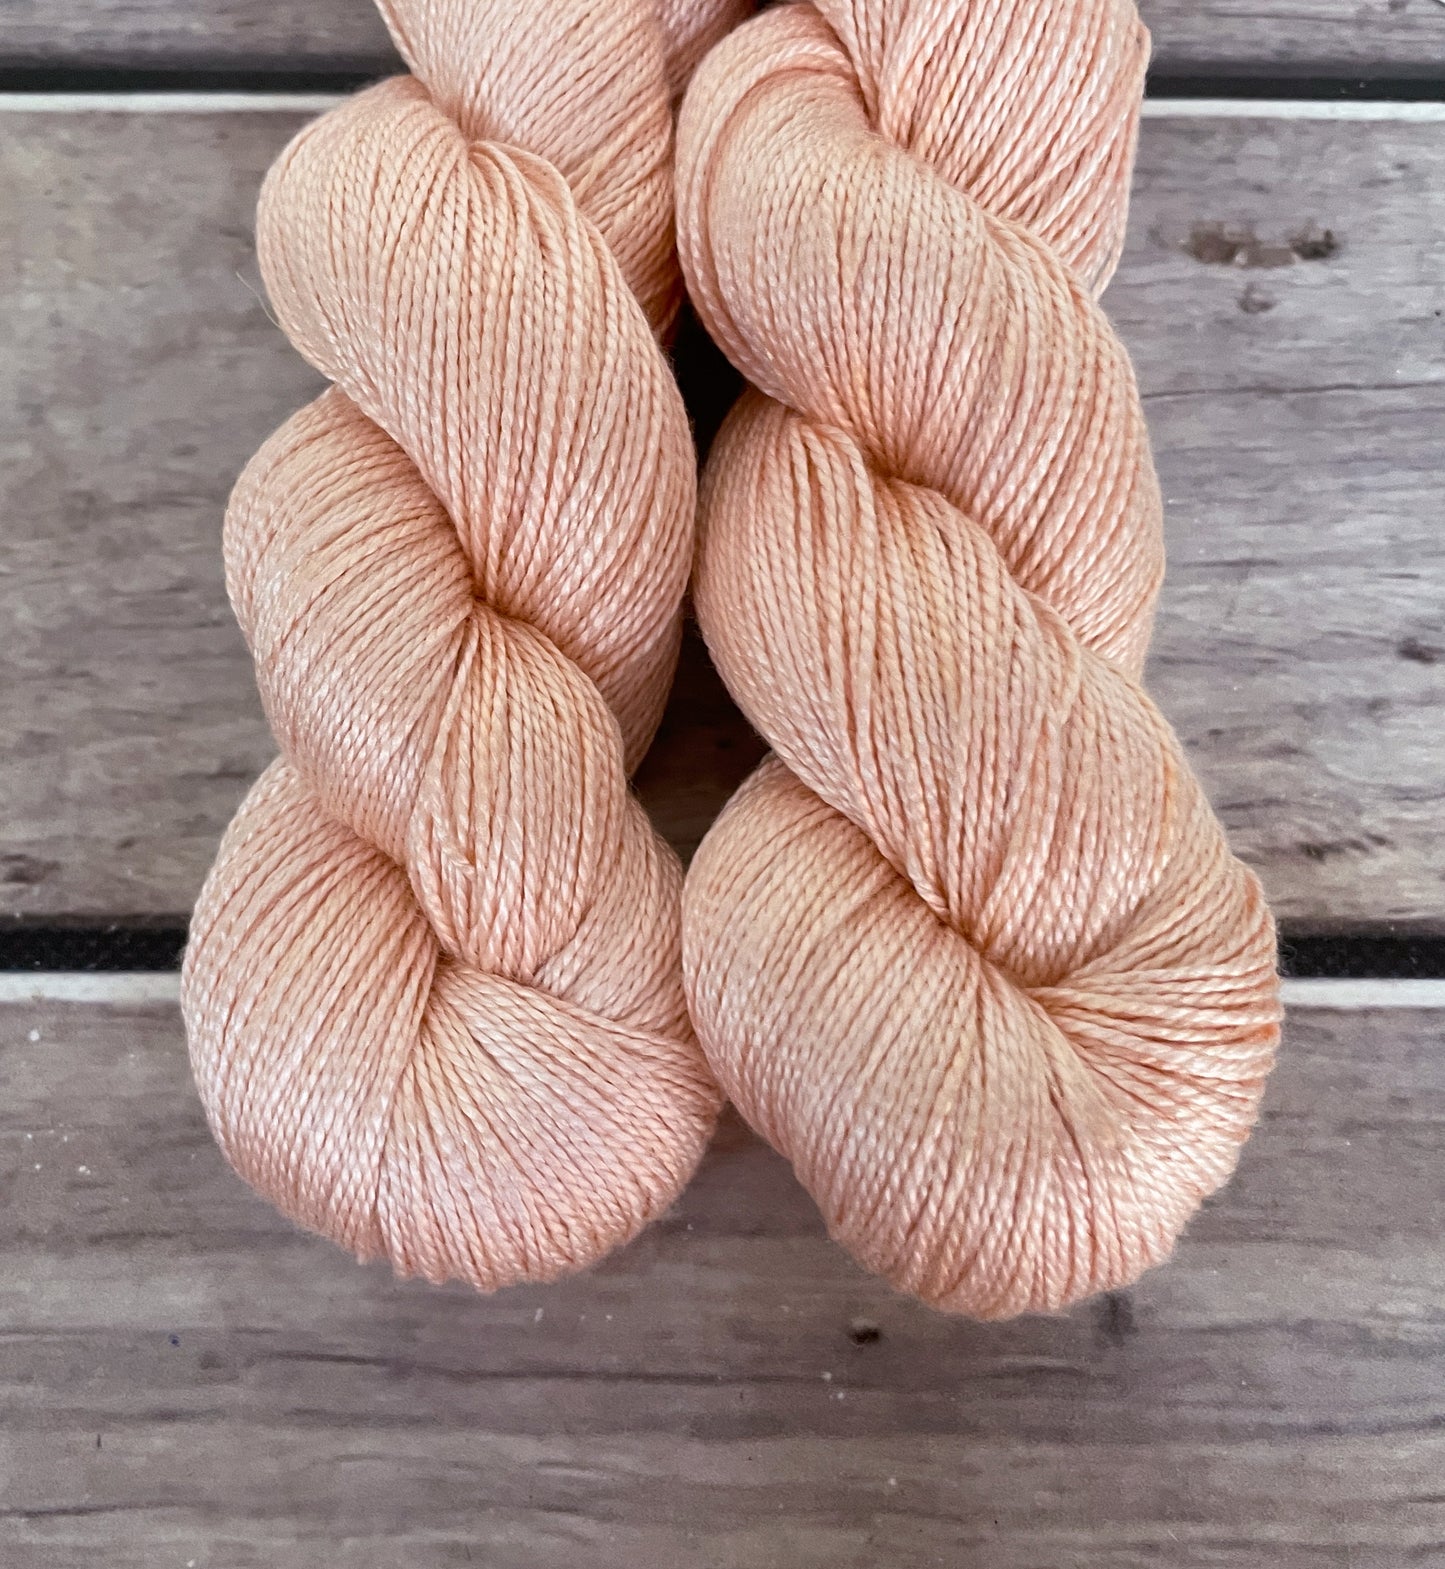 She Sells Seashells - 4 ply in Mulberry silk - Ginseng